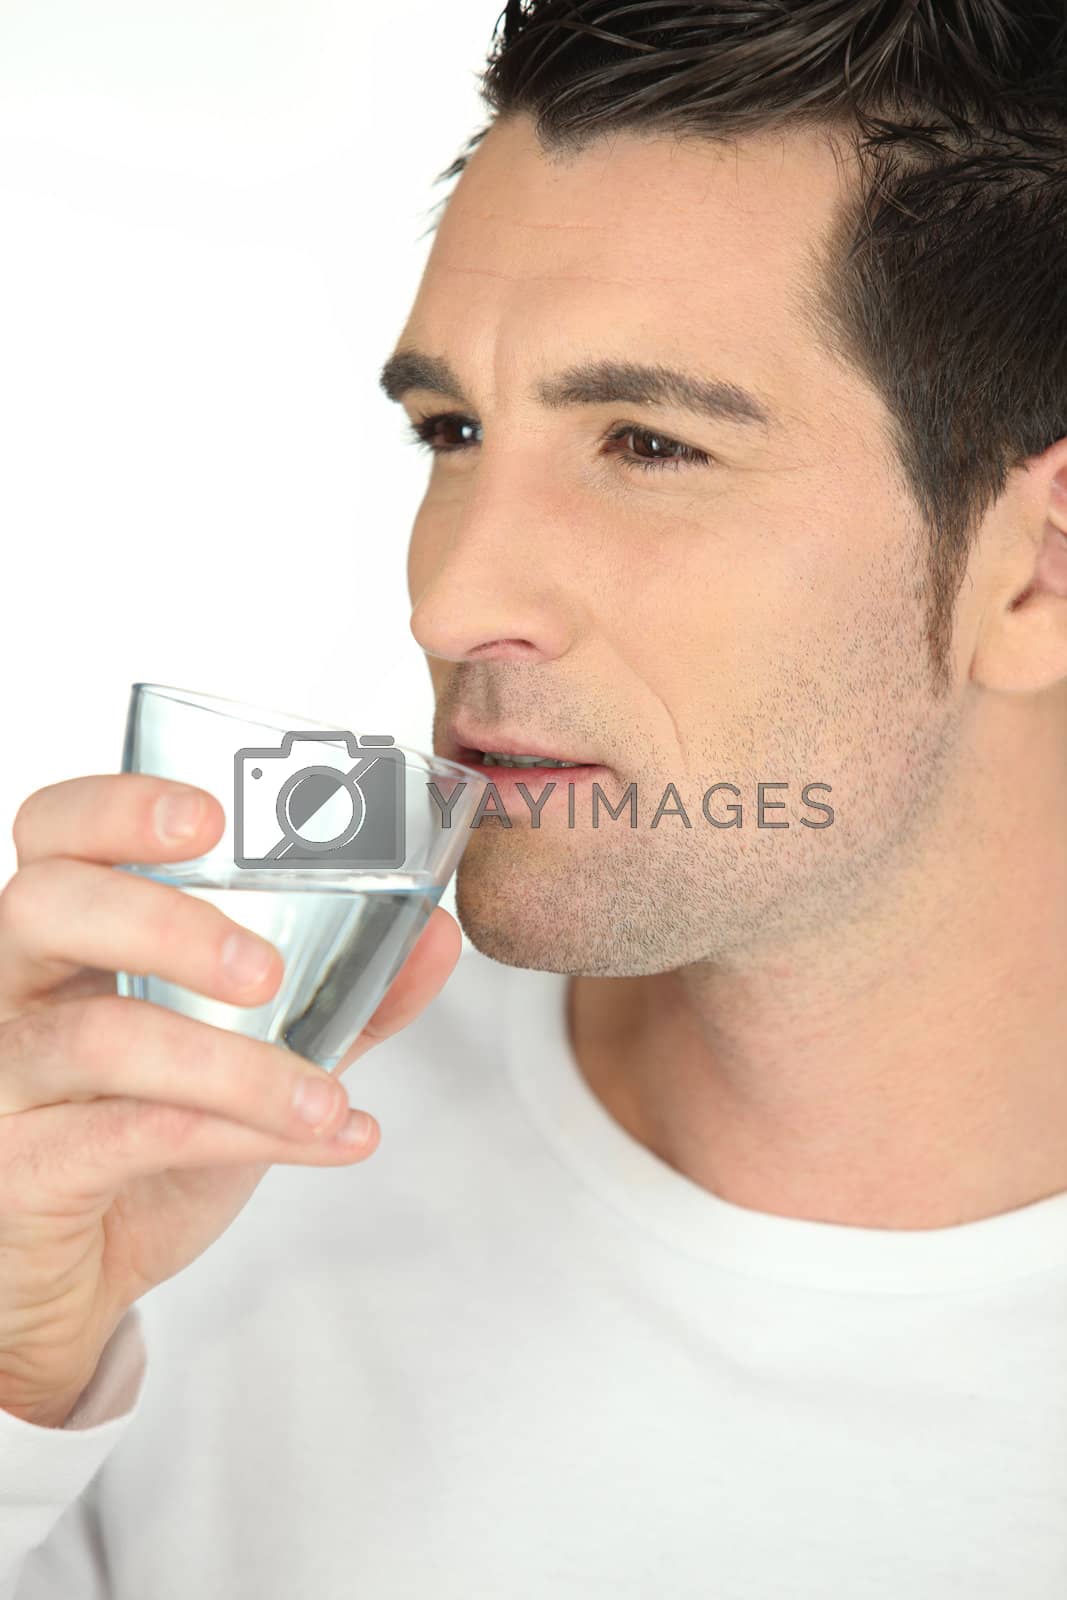 Royalty free image of bust shot of man drinking glass of water by phovoir